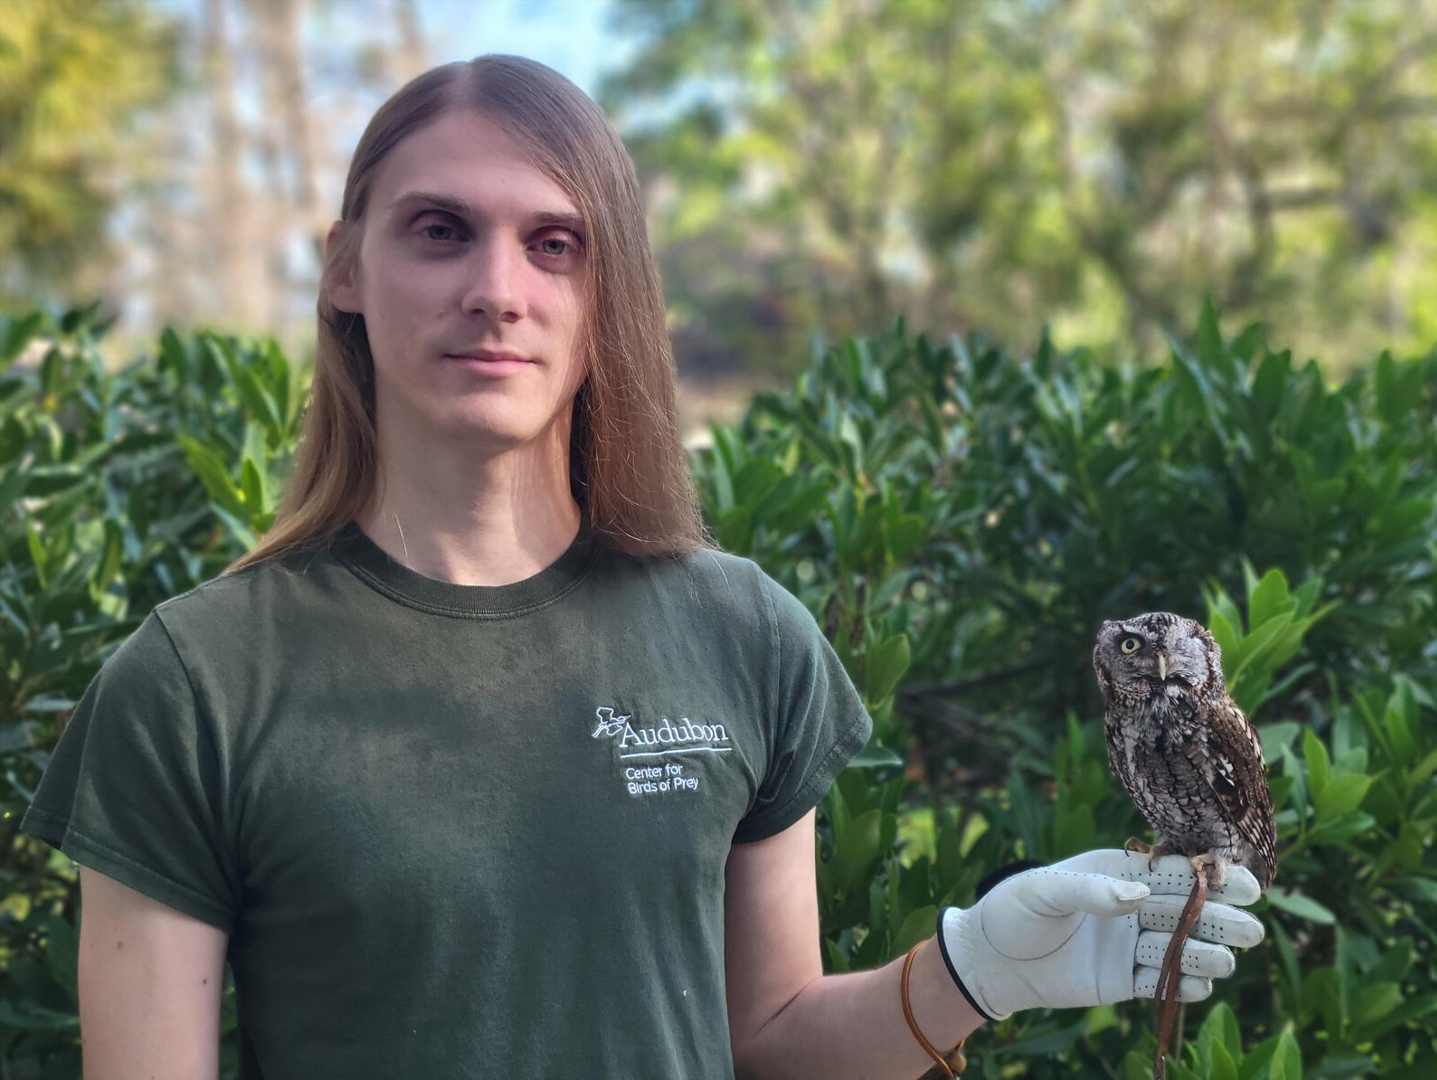 A man stands outdoors holding a small owl on his gloved hand.